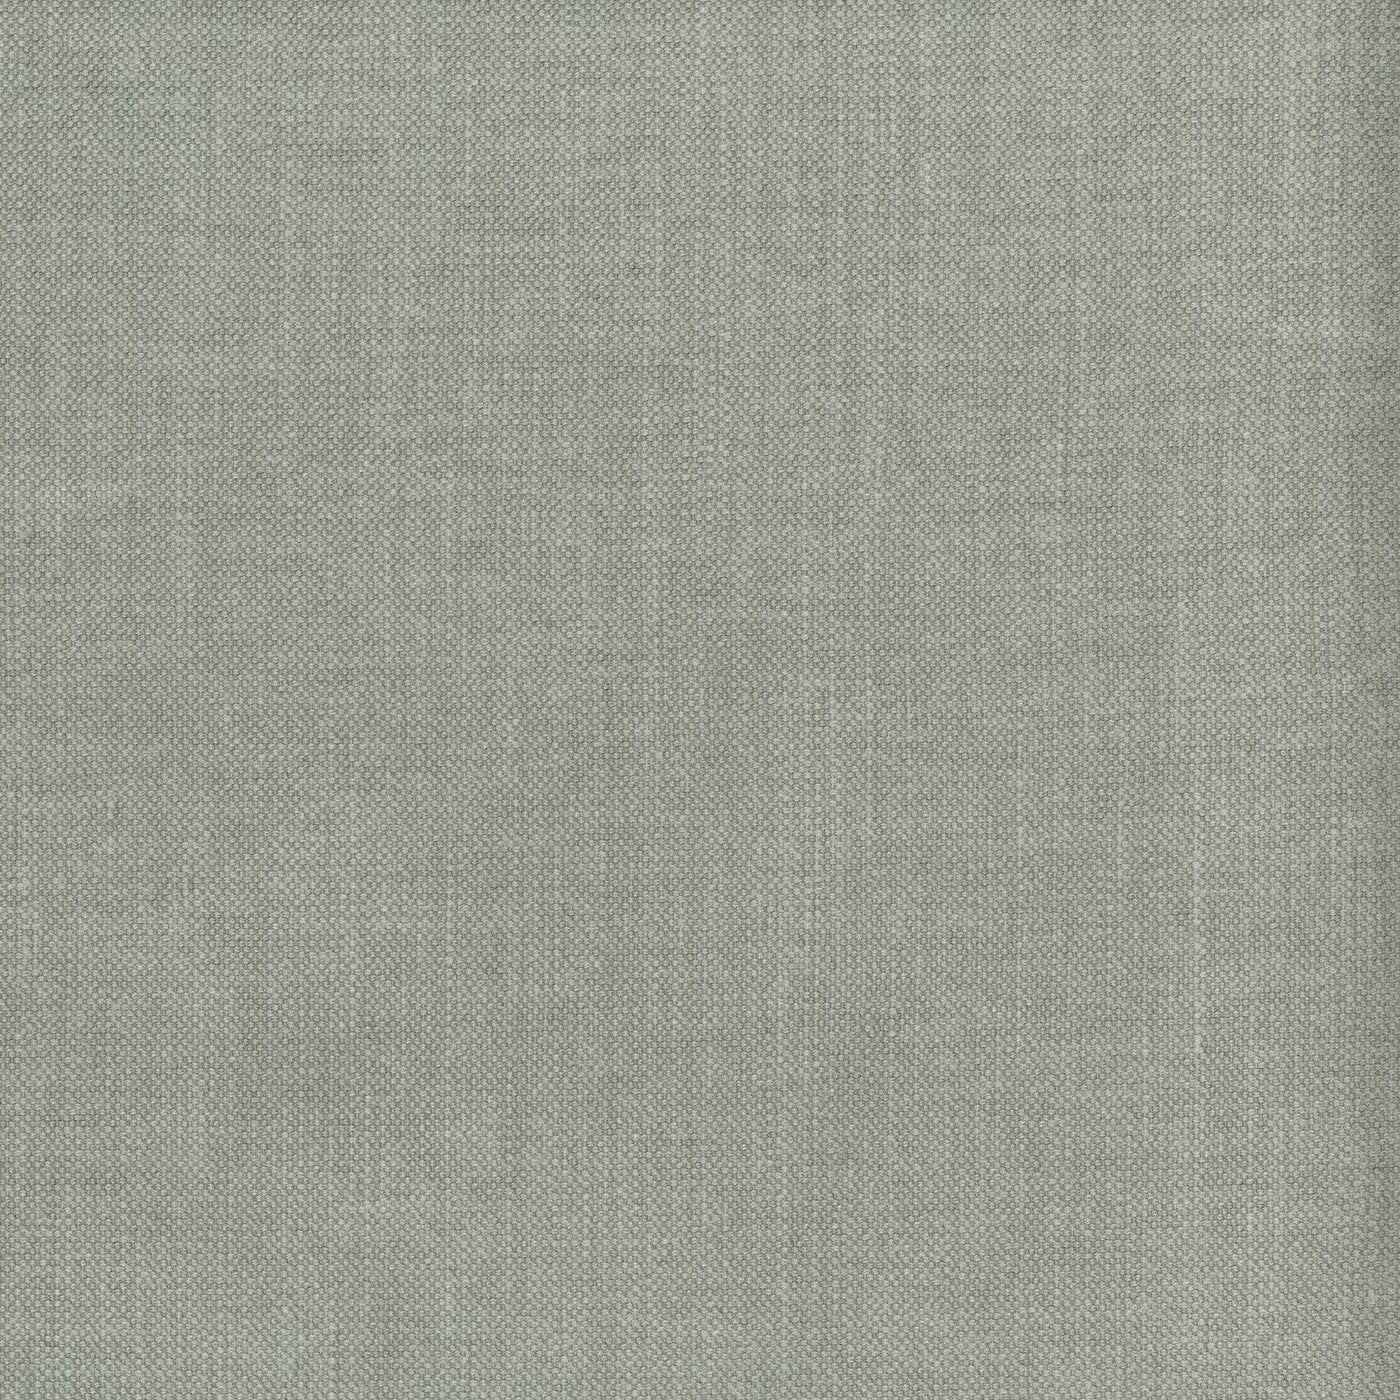 Pure 03 light grey upholstery fabric made to order for someday designs Toft sofas. Order free fabric swatches at someday designs. 